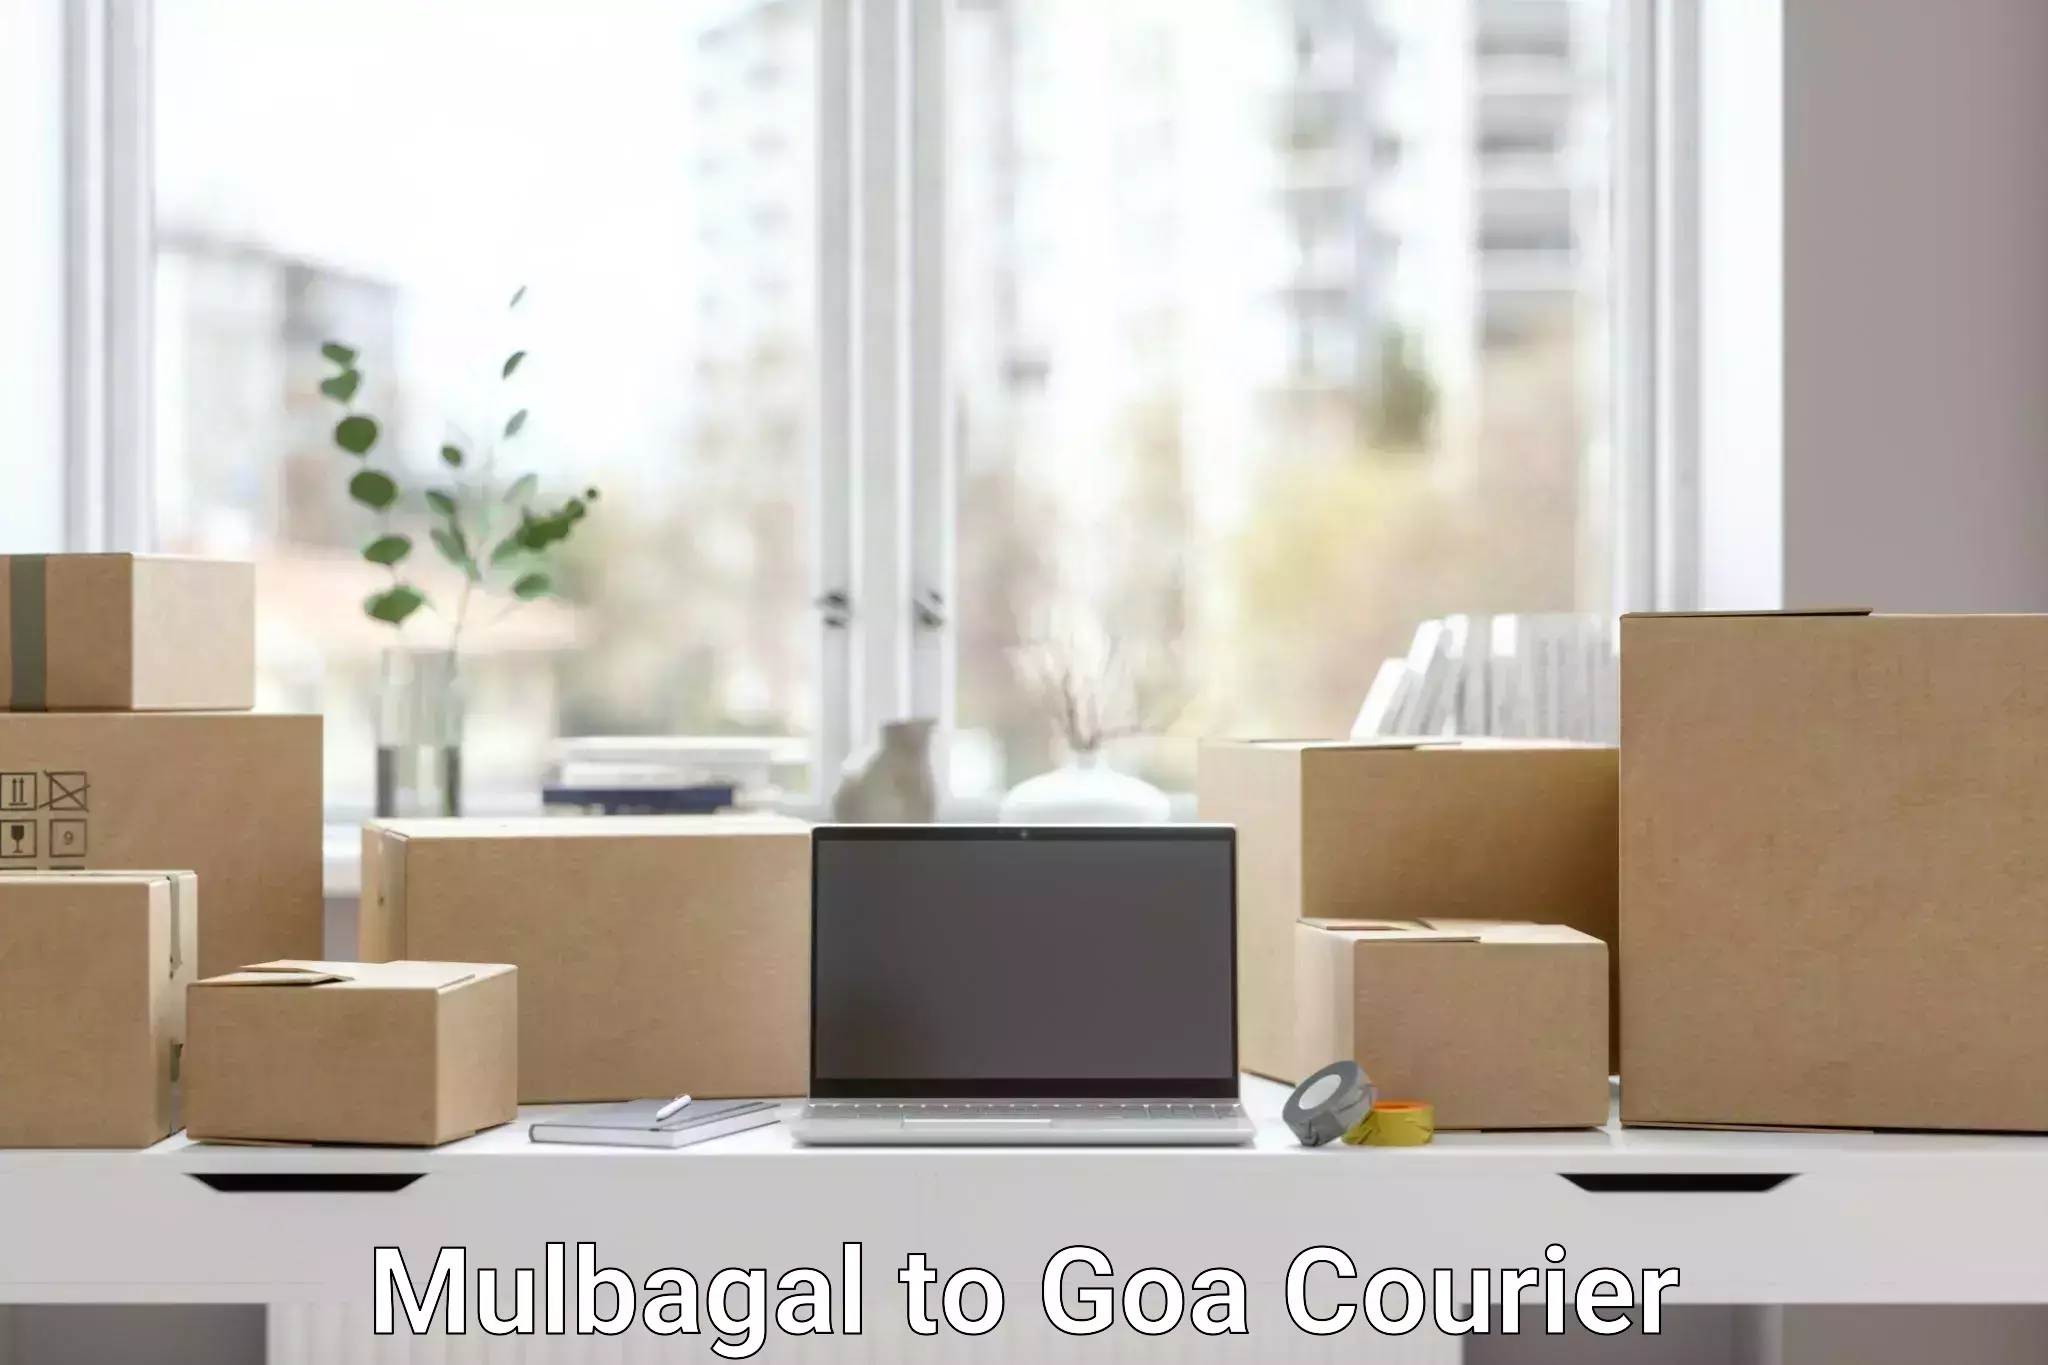 24/7 courier service Mulbagal to Goa